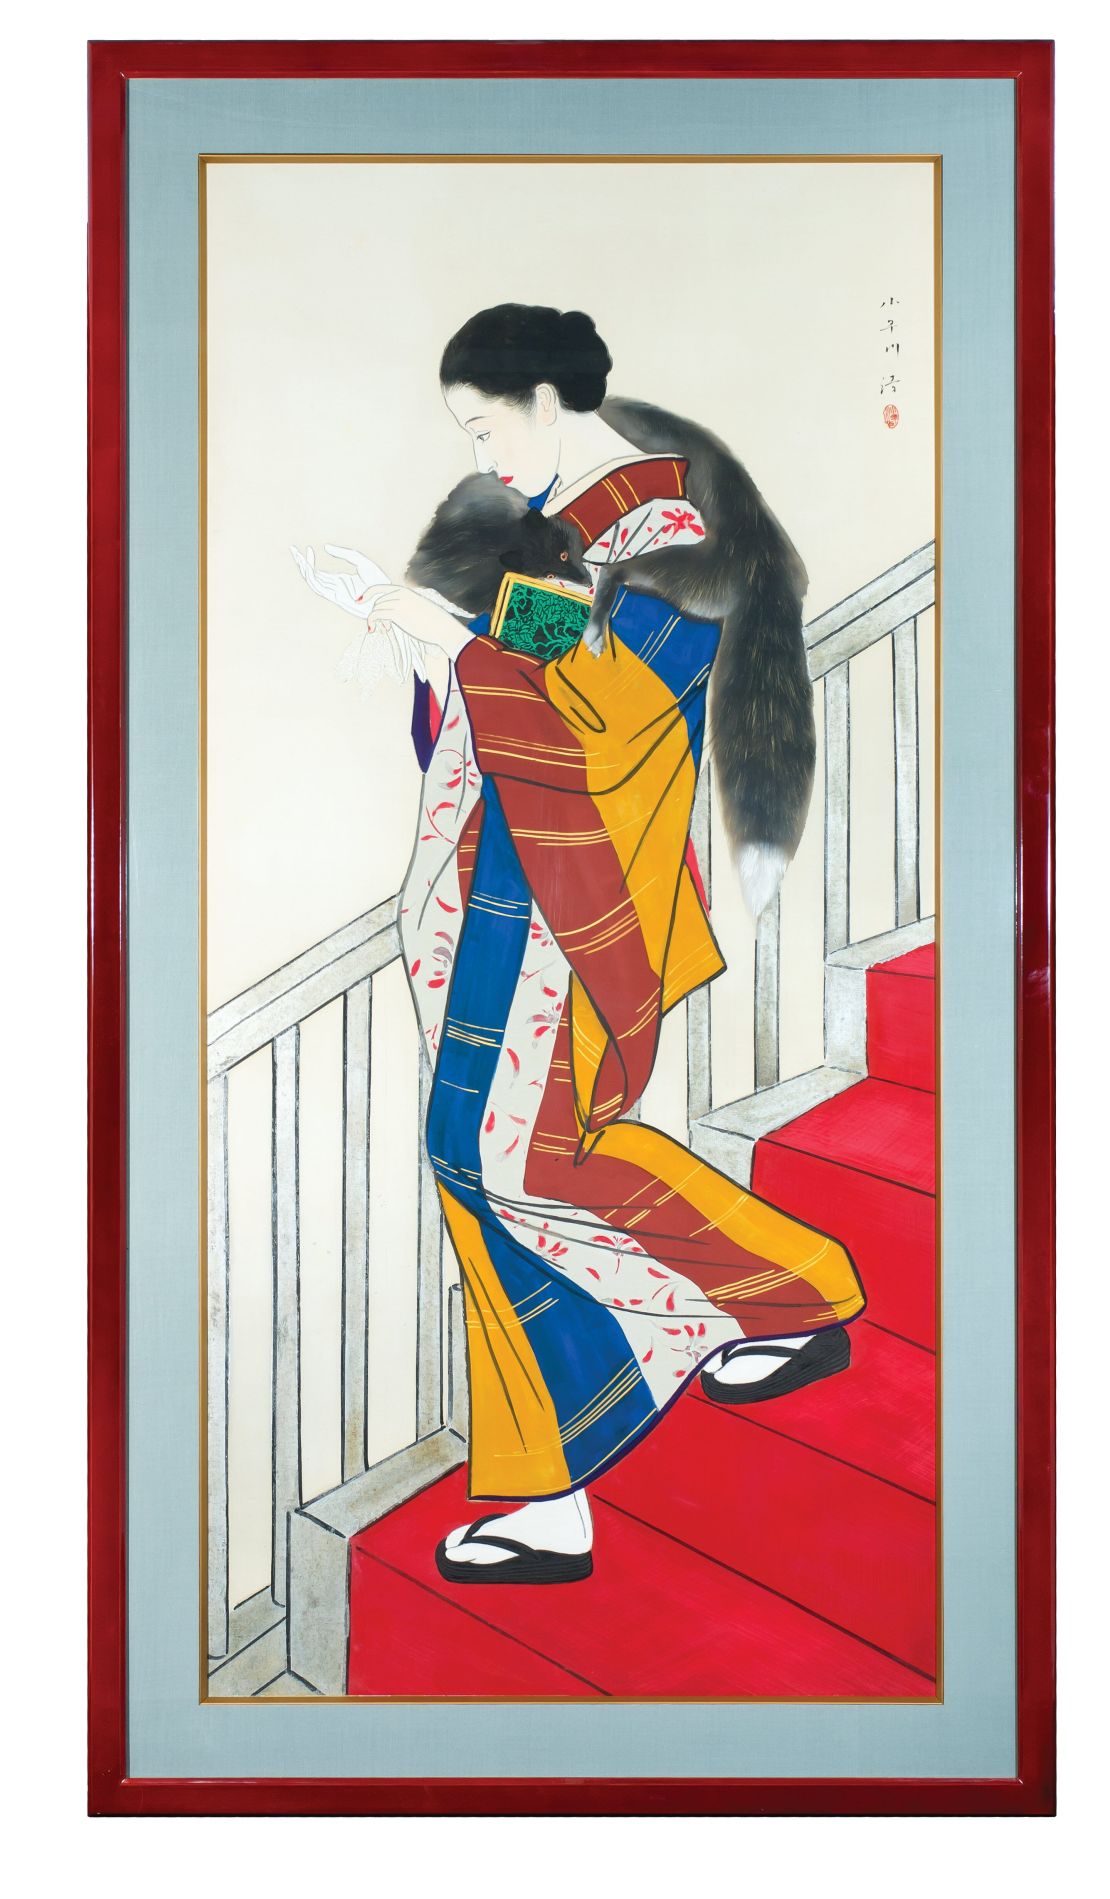 "Kaidan" ("Staircase") by Kobayakawa Kiyoshi, depicting a fashionable Japanese woman in the early 20th century. Her gloves and fur scarf suggest a European influence. 